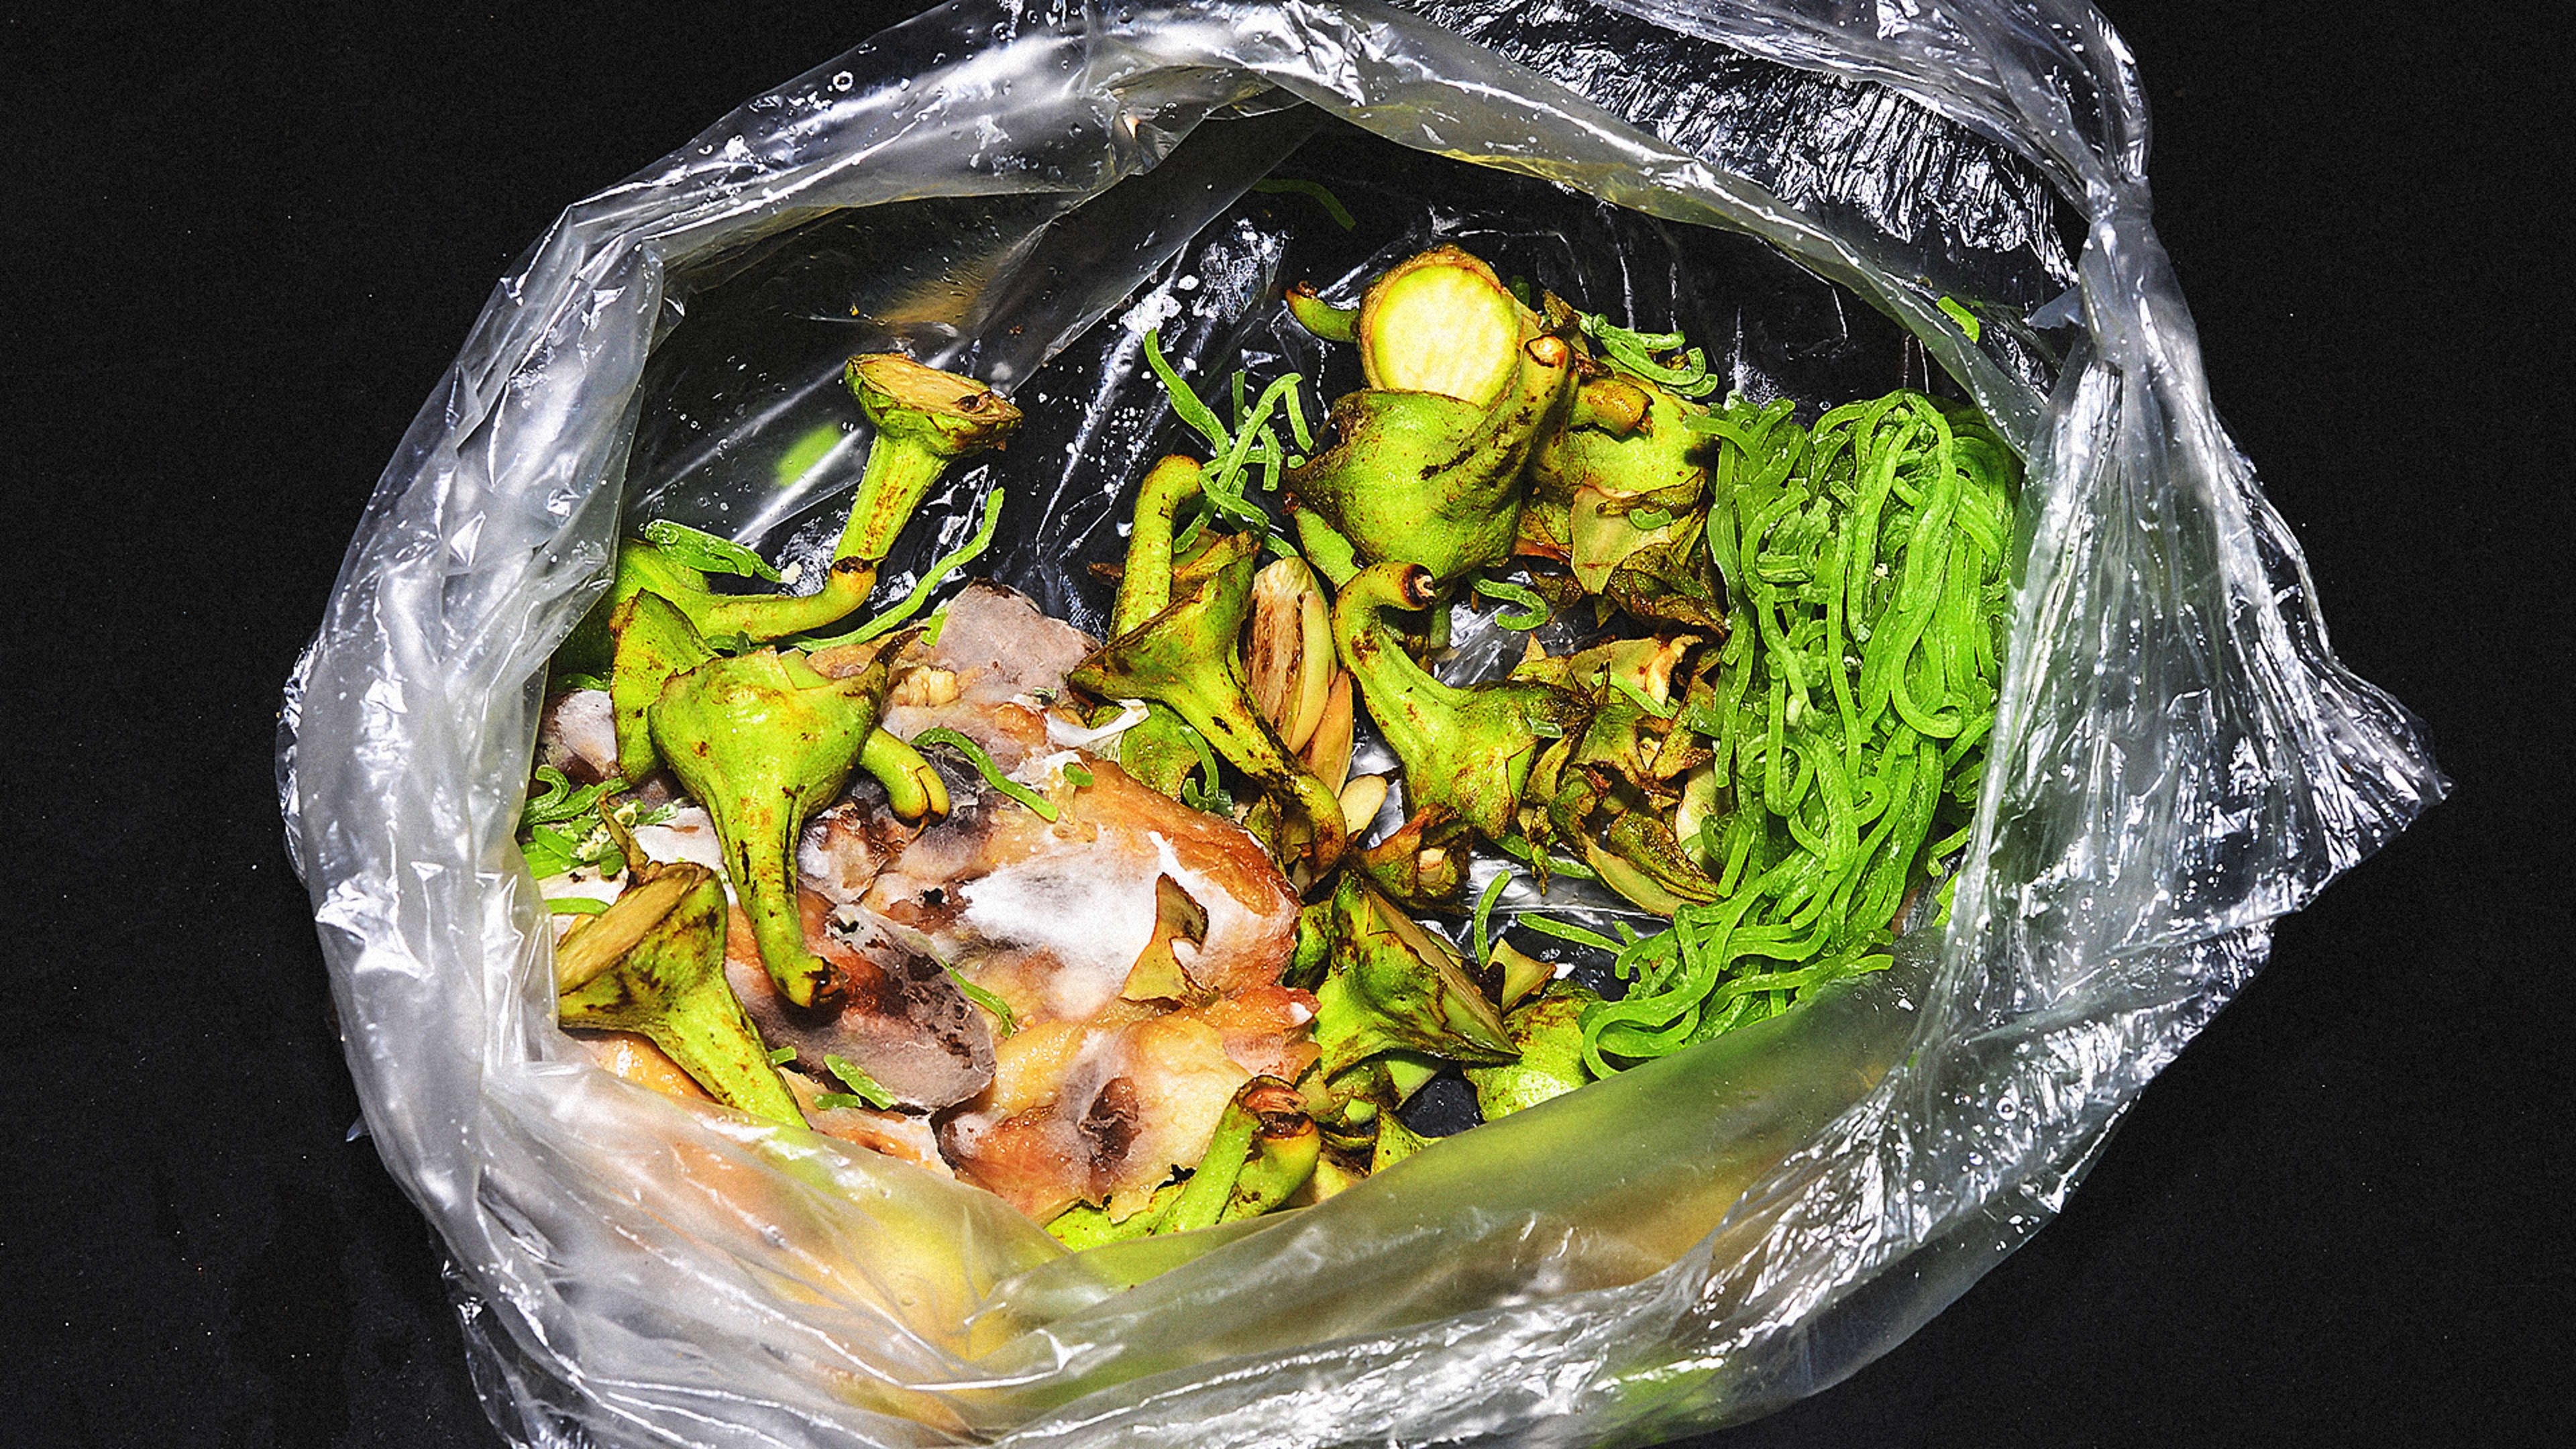 For Every $1 Spent On Reducing Food Waste, Companies Save $14